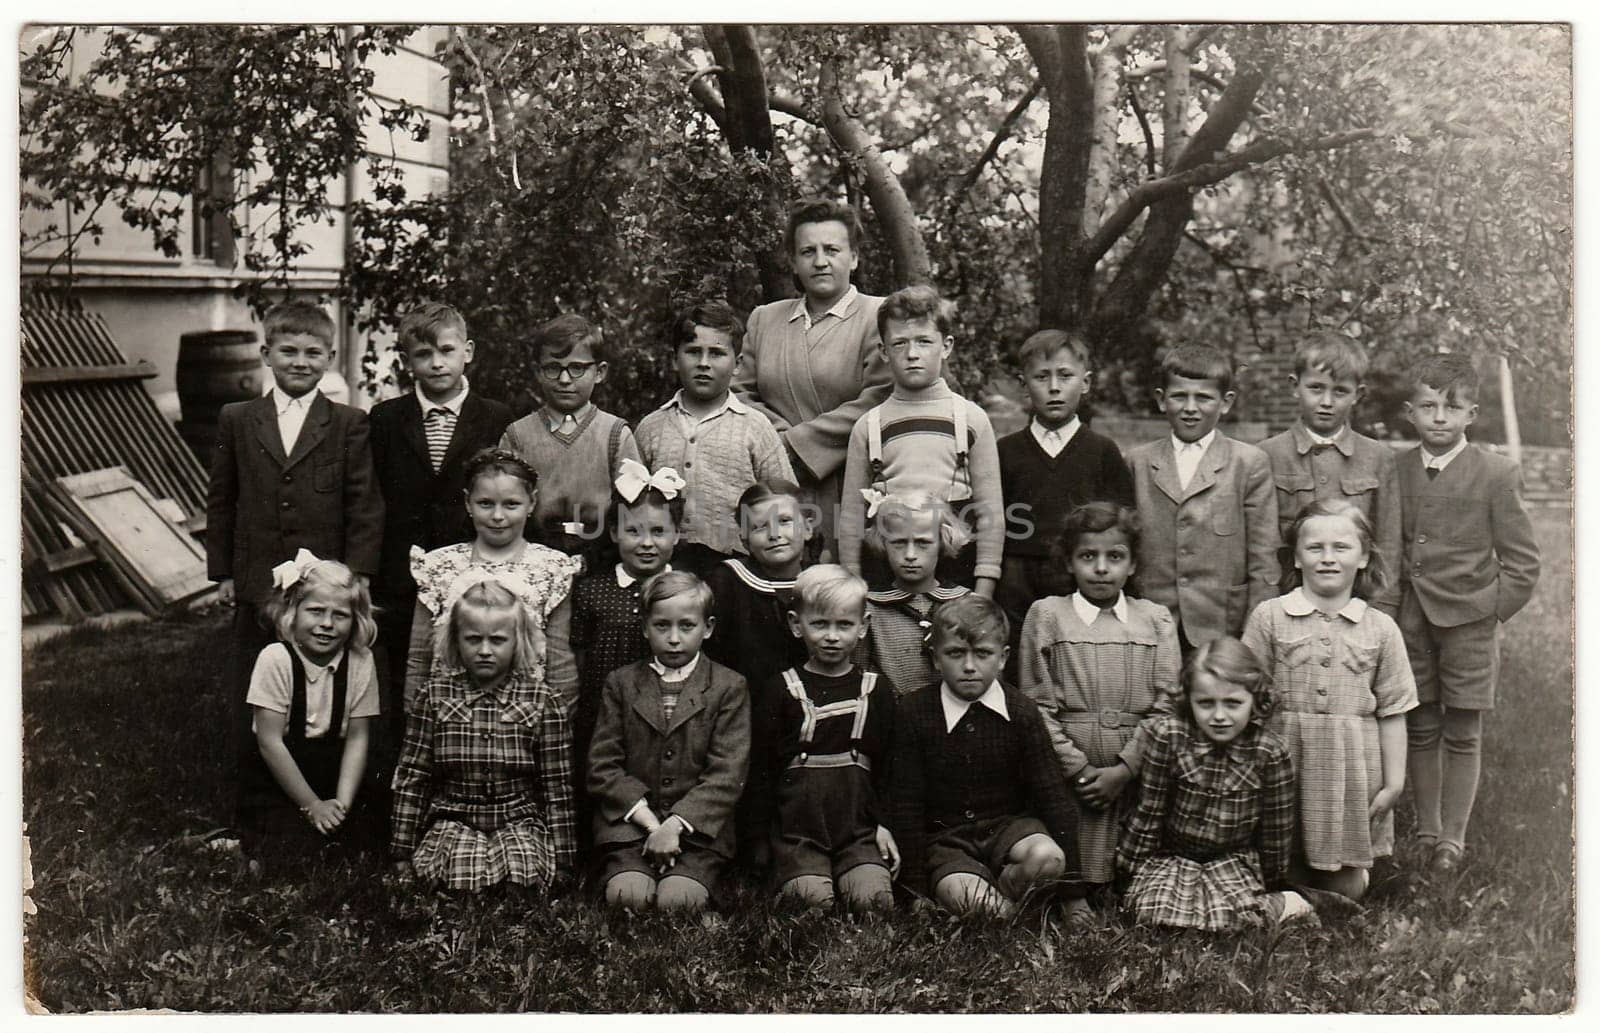 THE CZECHOSLOVAK SOCIALIST REPUBLIC - CIRCA 1950s: Vintage photo shows classmates (about 10 years old) with teacher